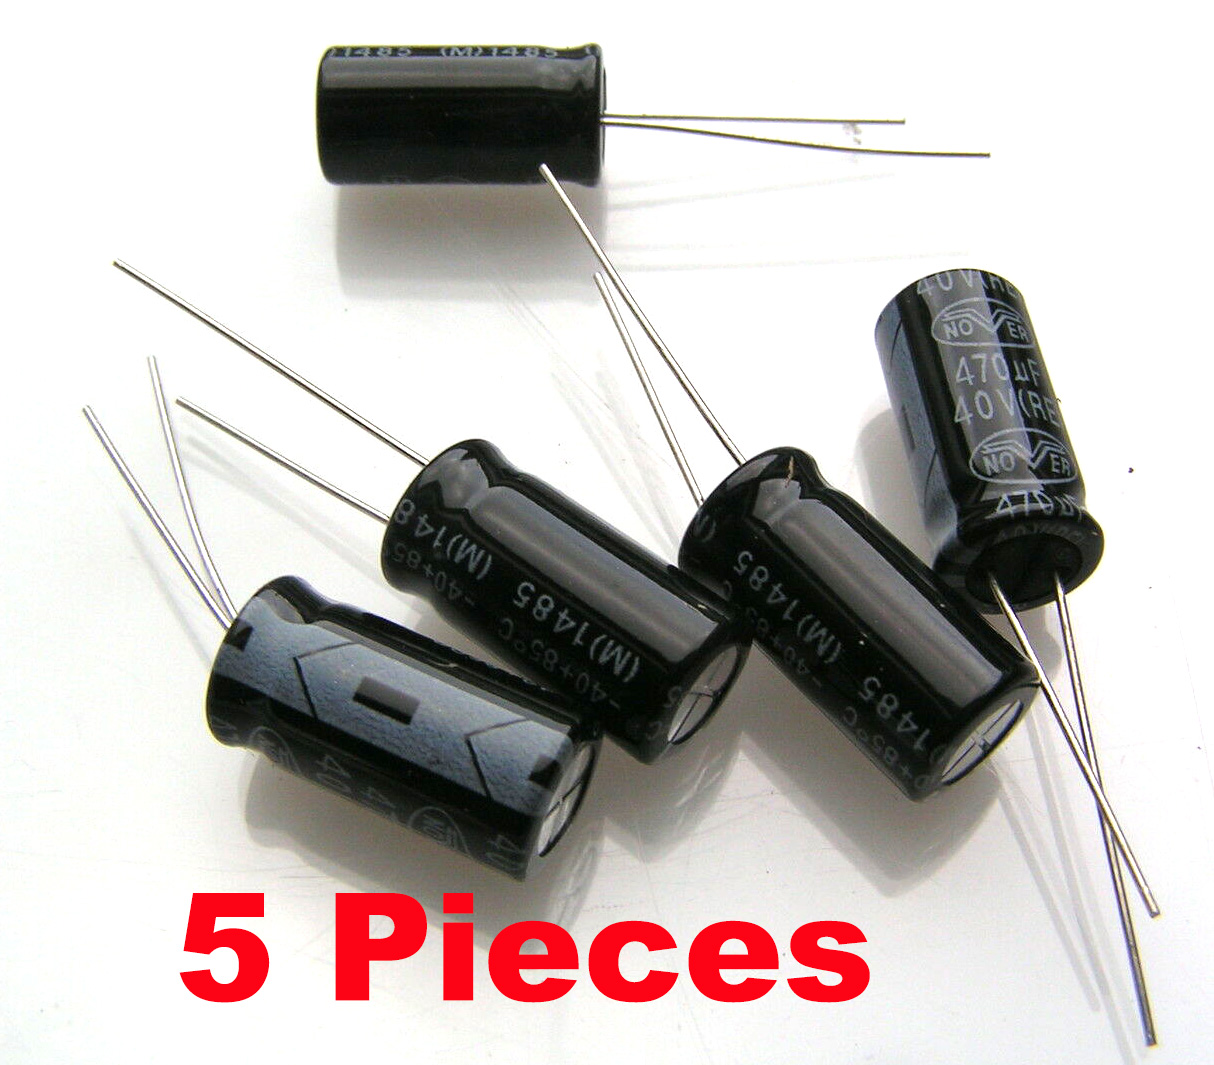 Nover RE1G471MFE 40V 470uF Electrolytic Capacitor 5 Pieces OL0183